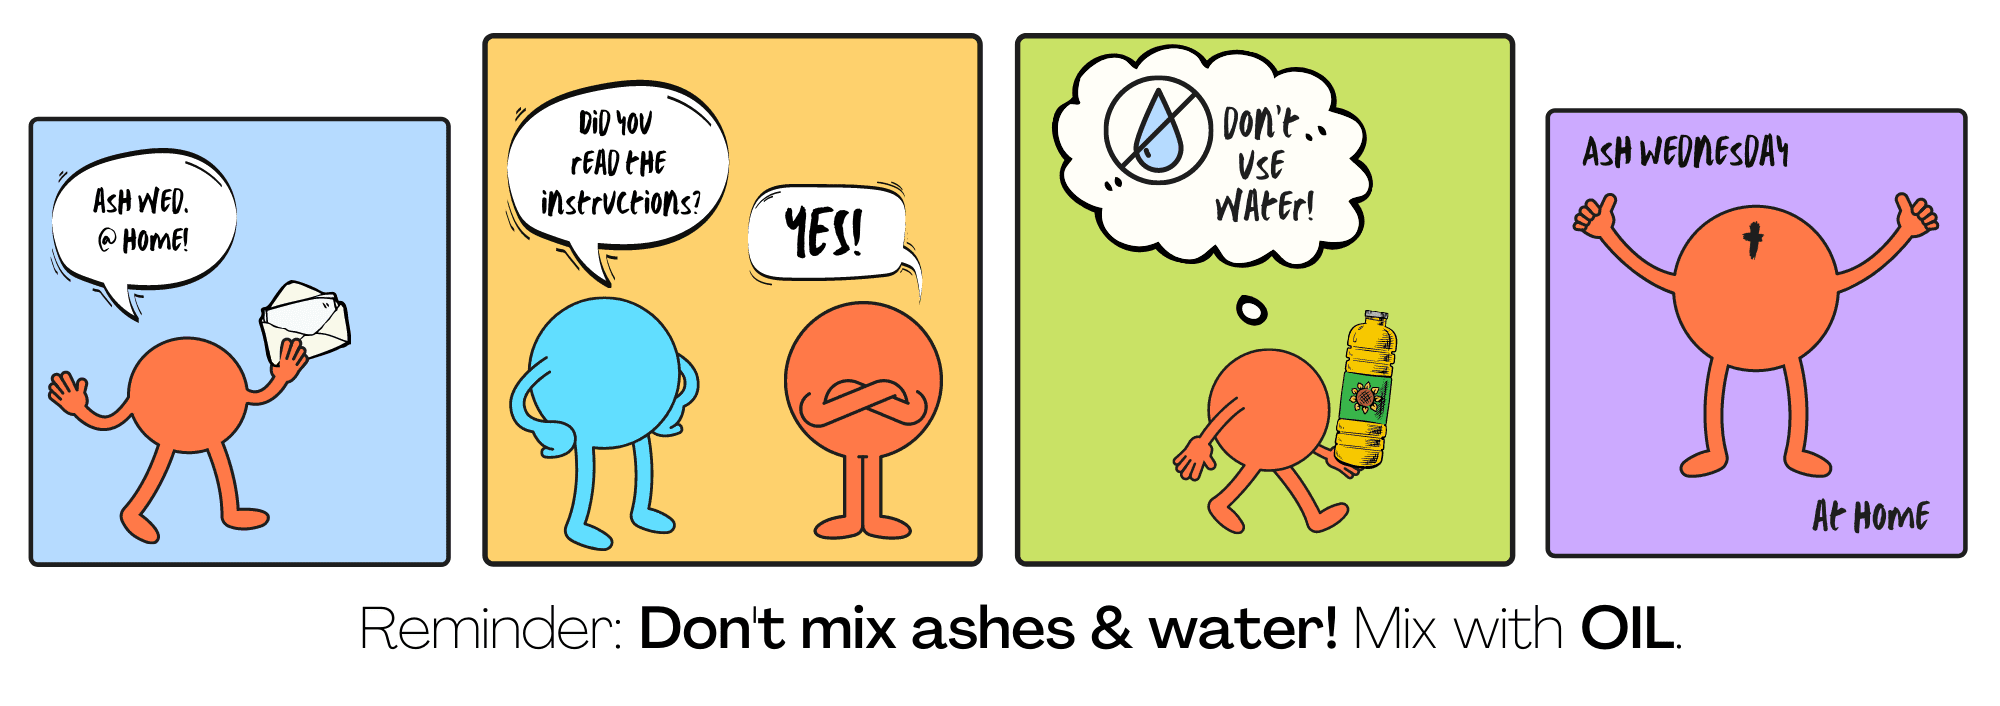 a cartoon with circle characters talking about Ash Wednesday